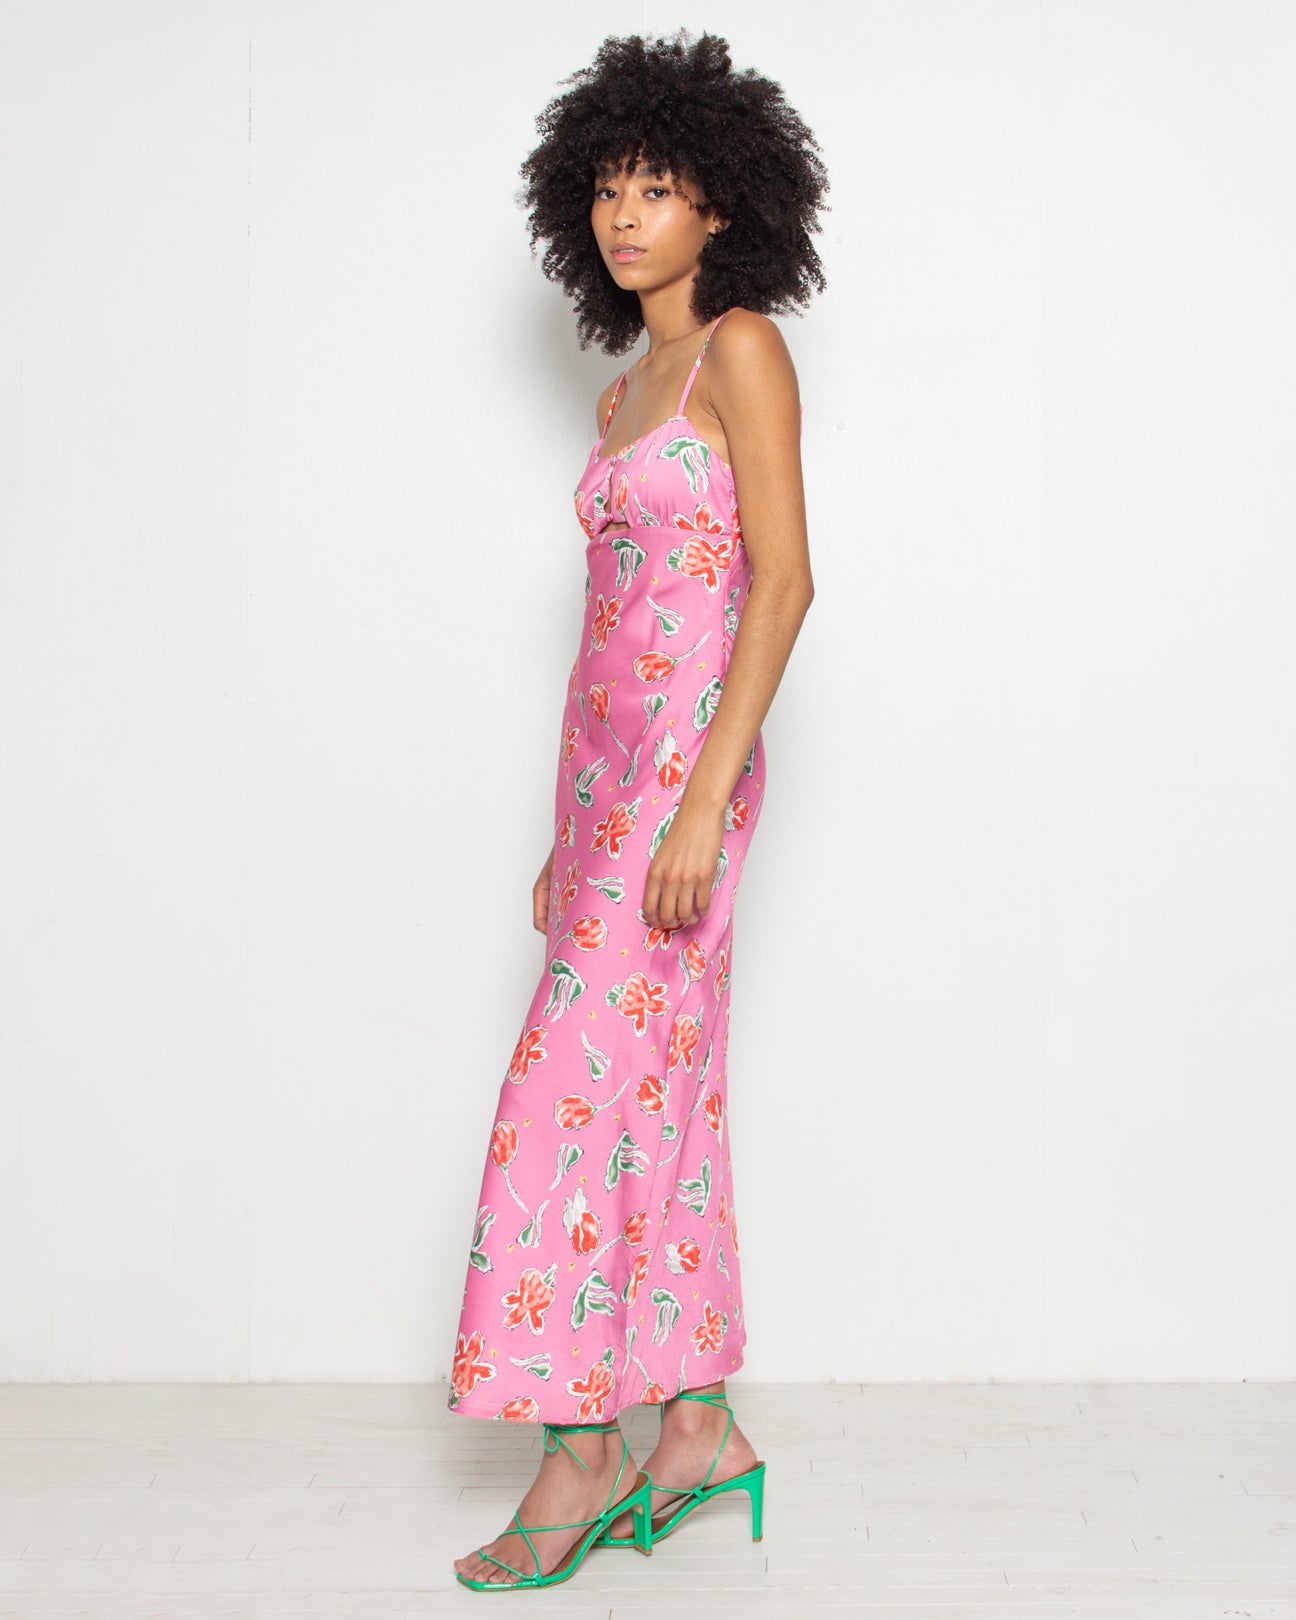 PERSONS Ophelia Cut Out Maxi Dress in Bubblegum Floral